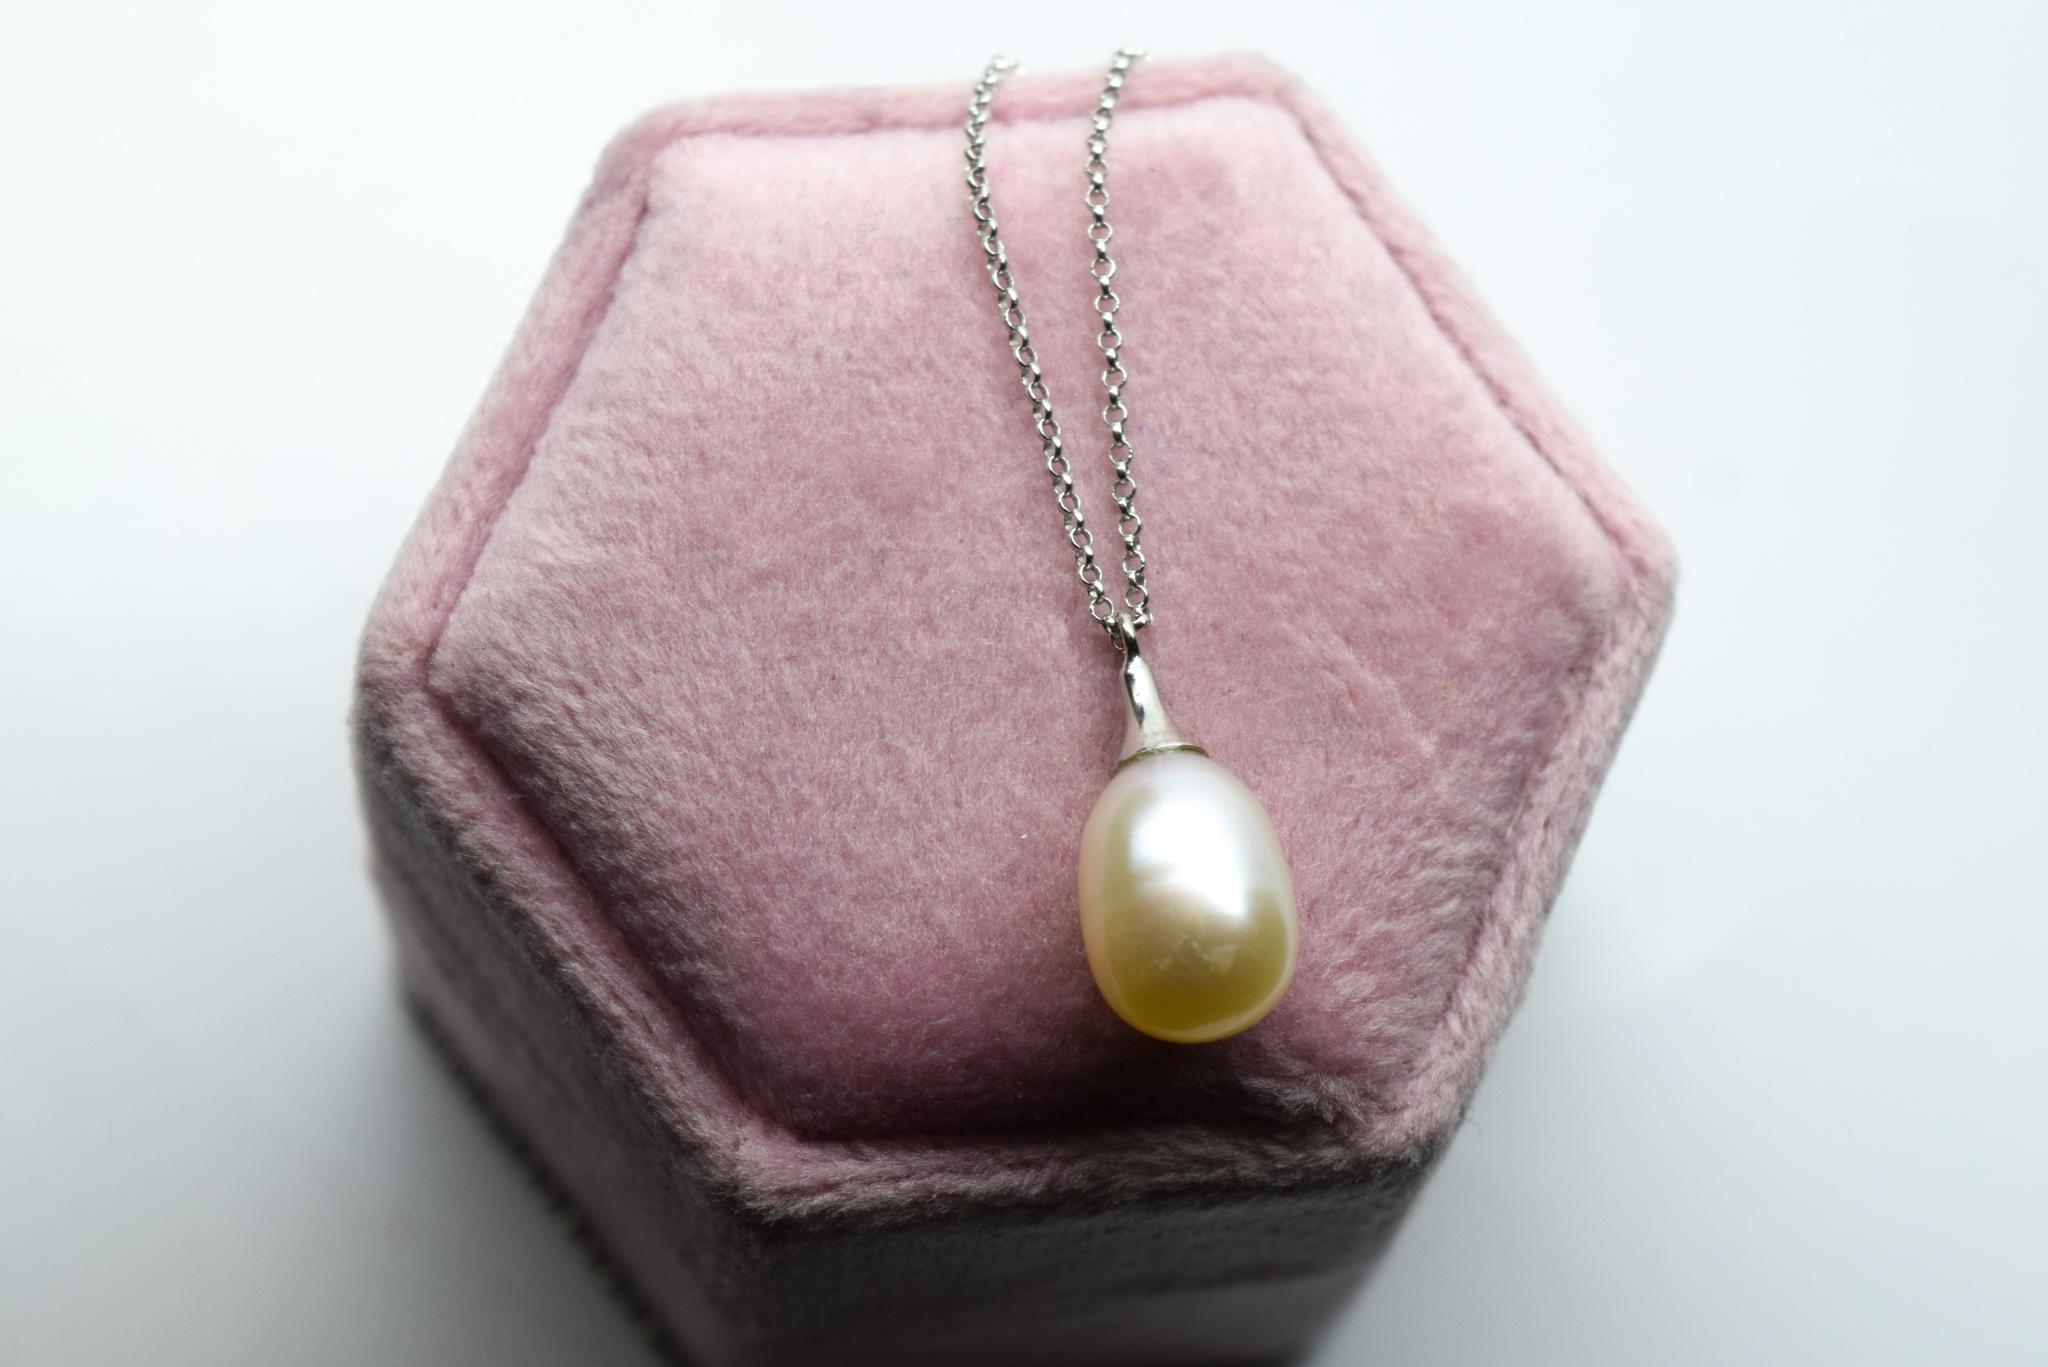 Pearl pendant necklace 14KT yellow gold For Sale 3